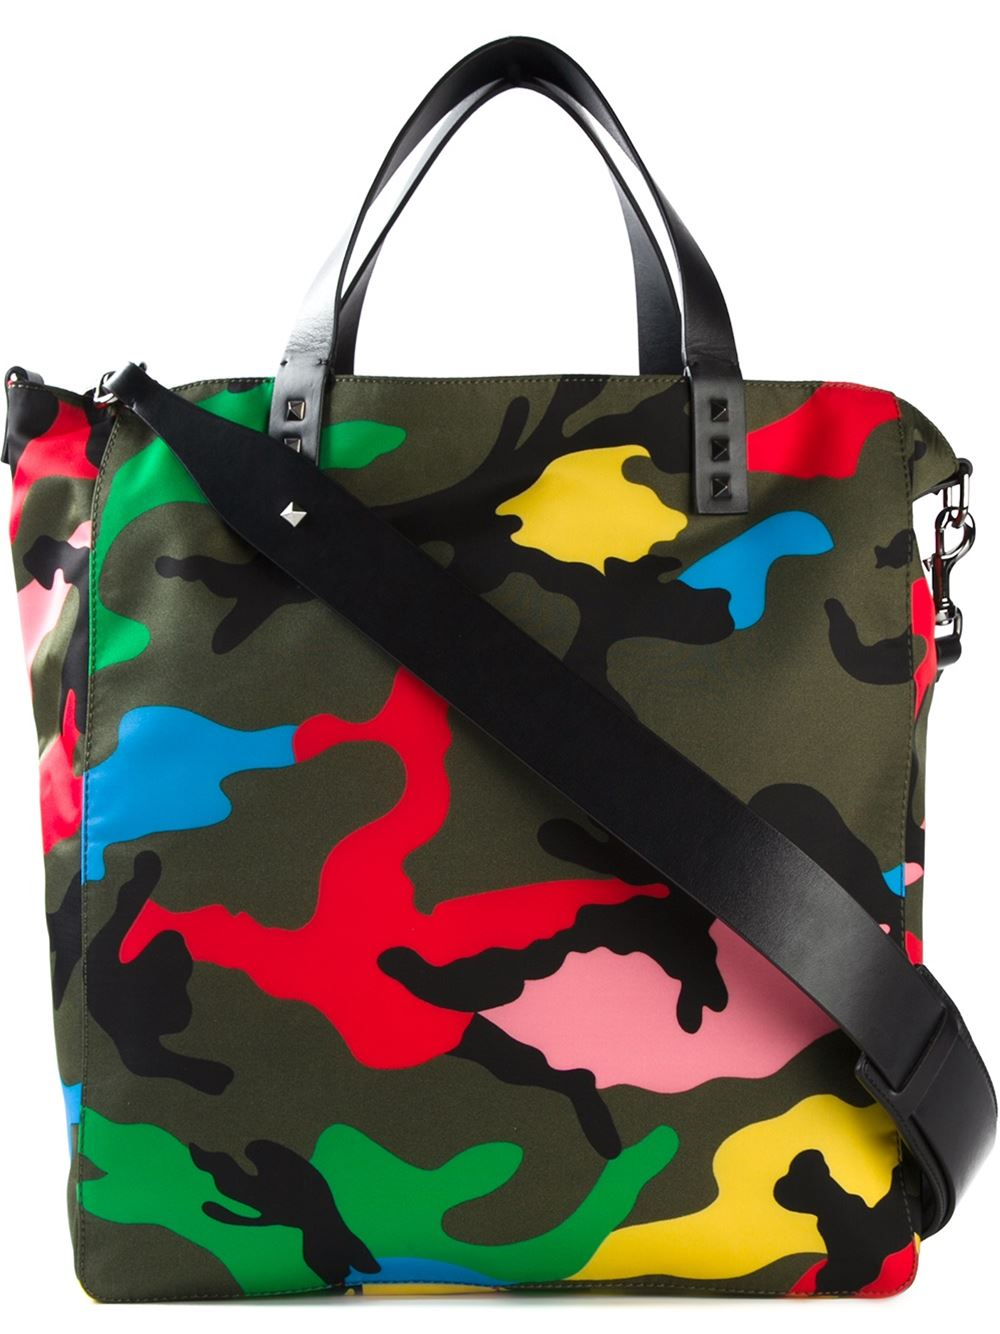 Valentino 'Rockstud' Camouflage Tote in Green for Men - Lyst